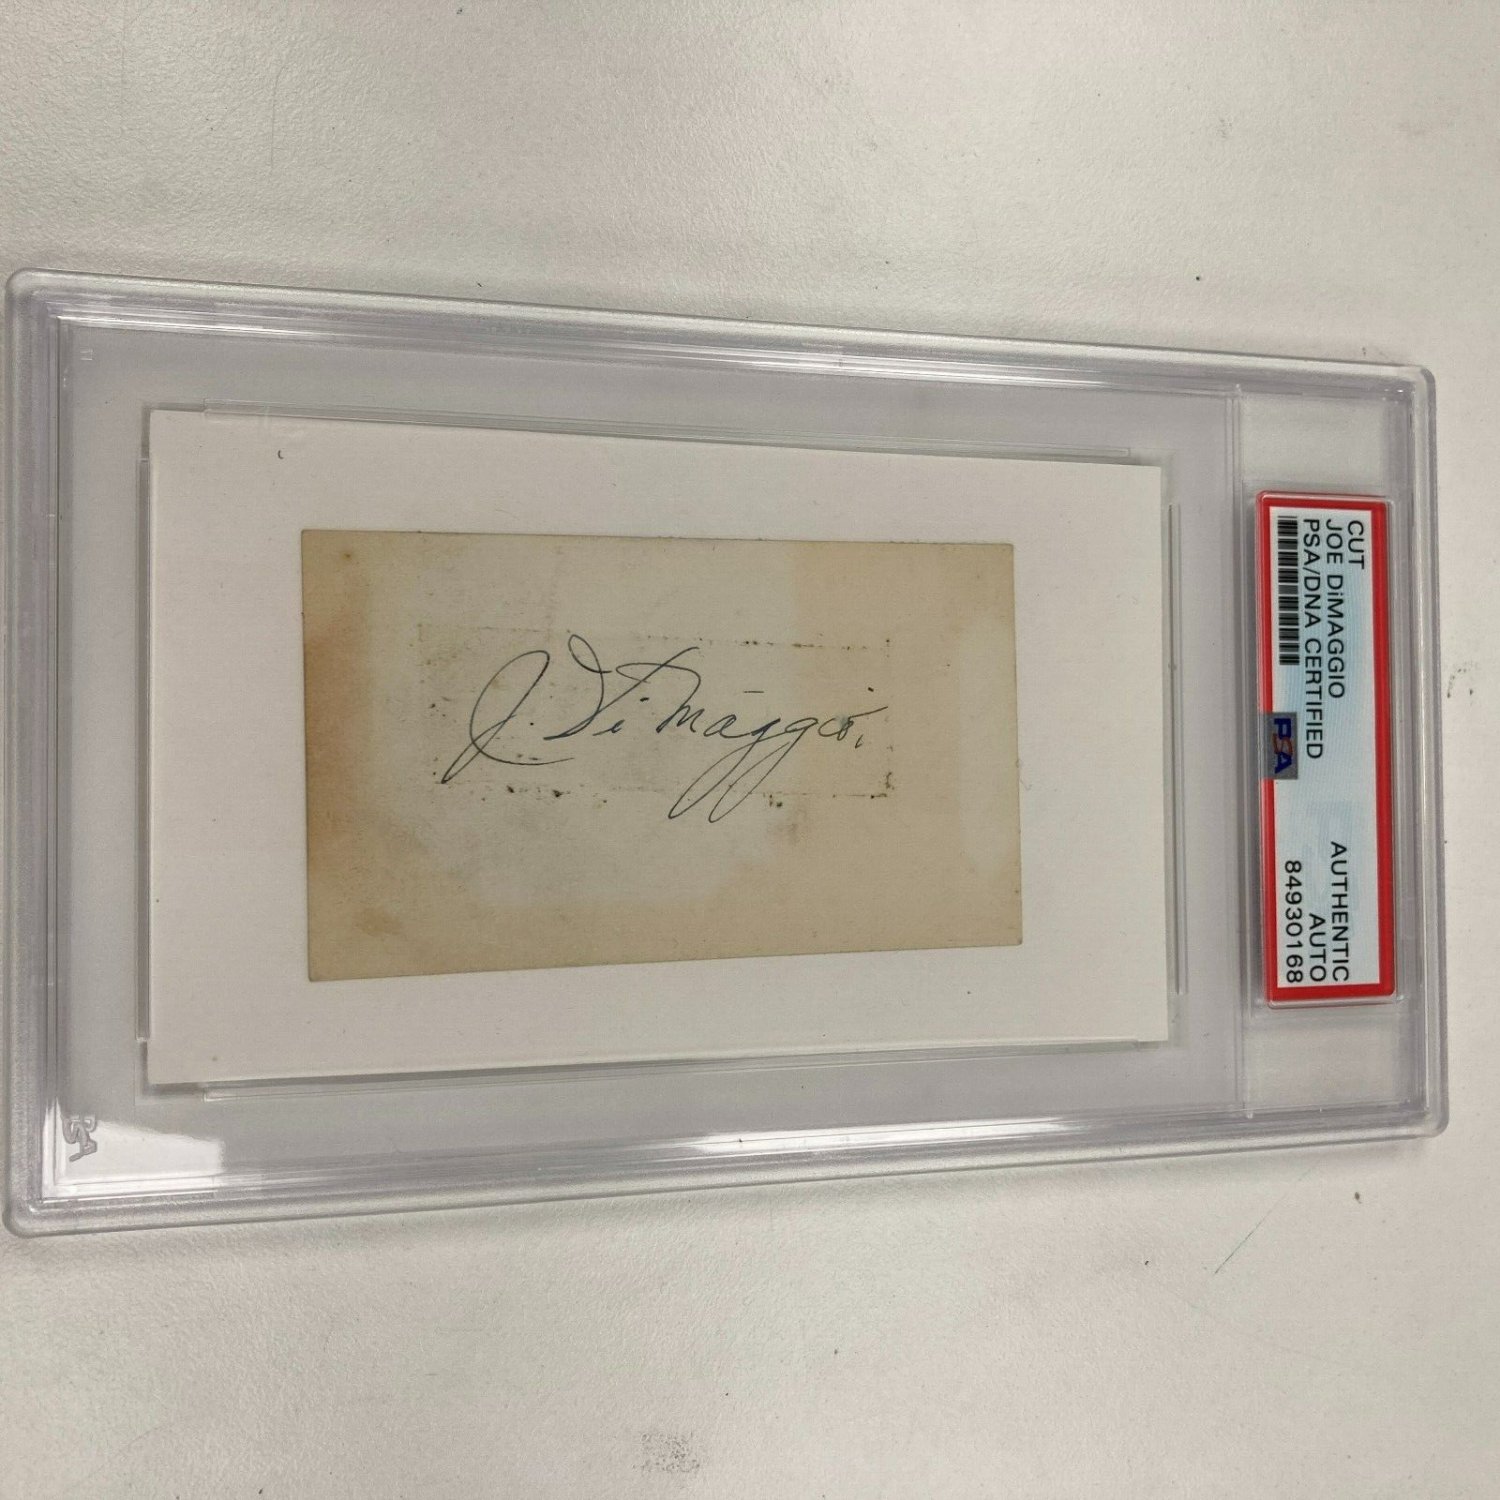 Joe Dimaggio Autographed Signed 1936 Rookie Index Card PSA DNA Certified